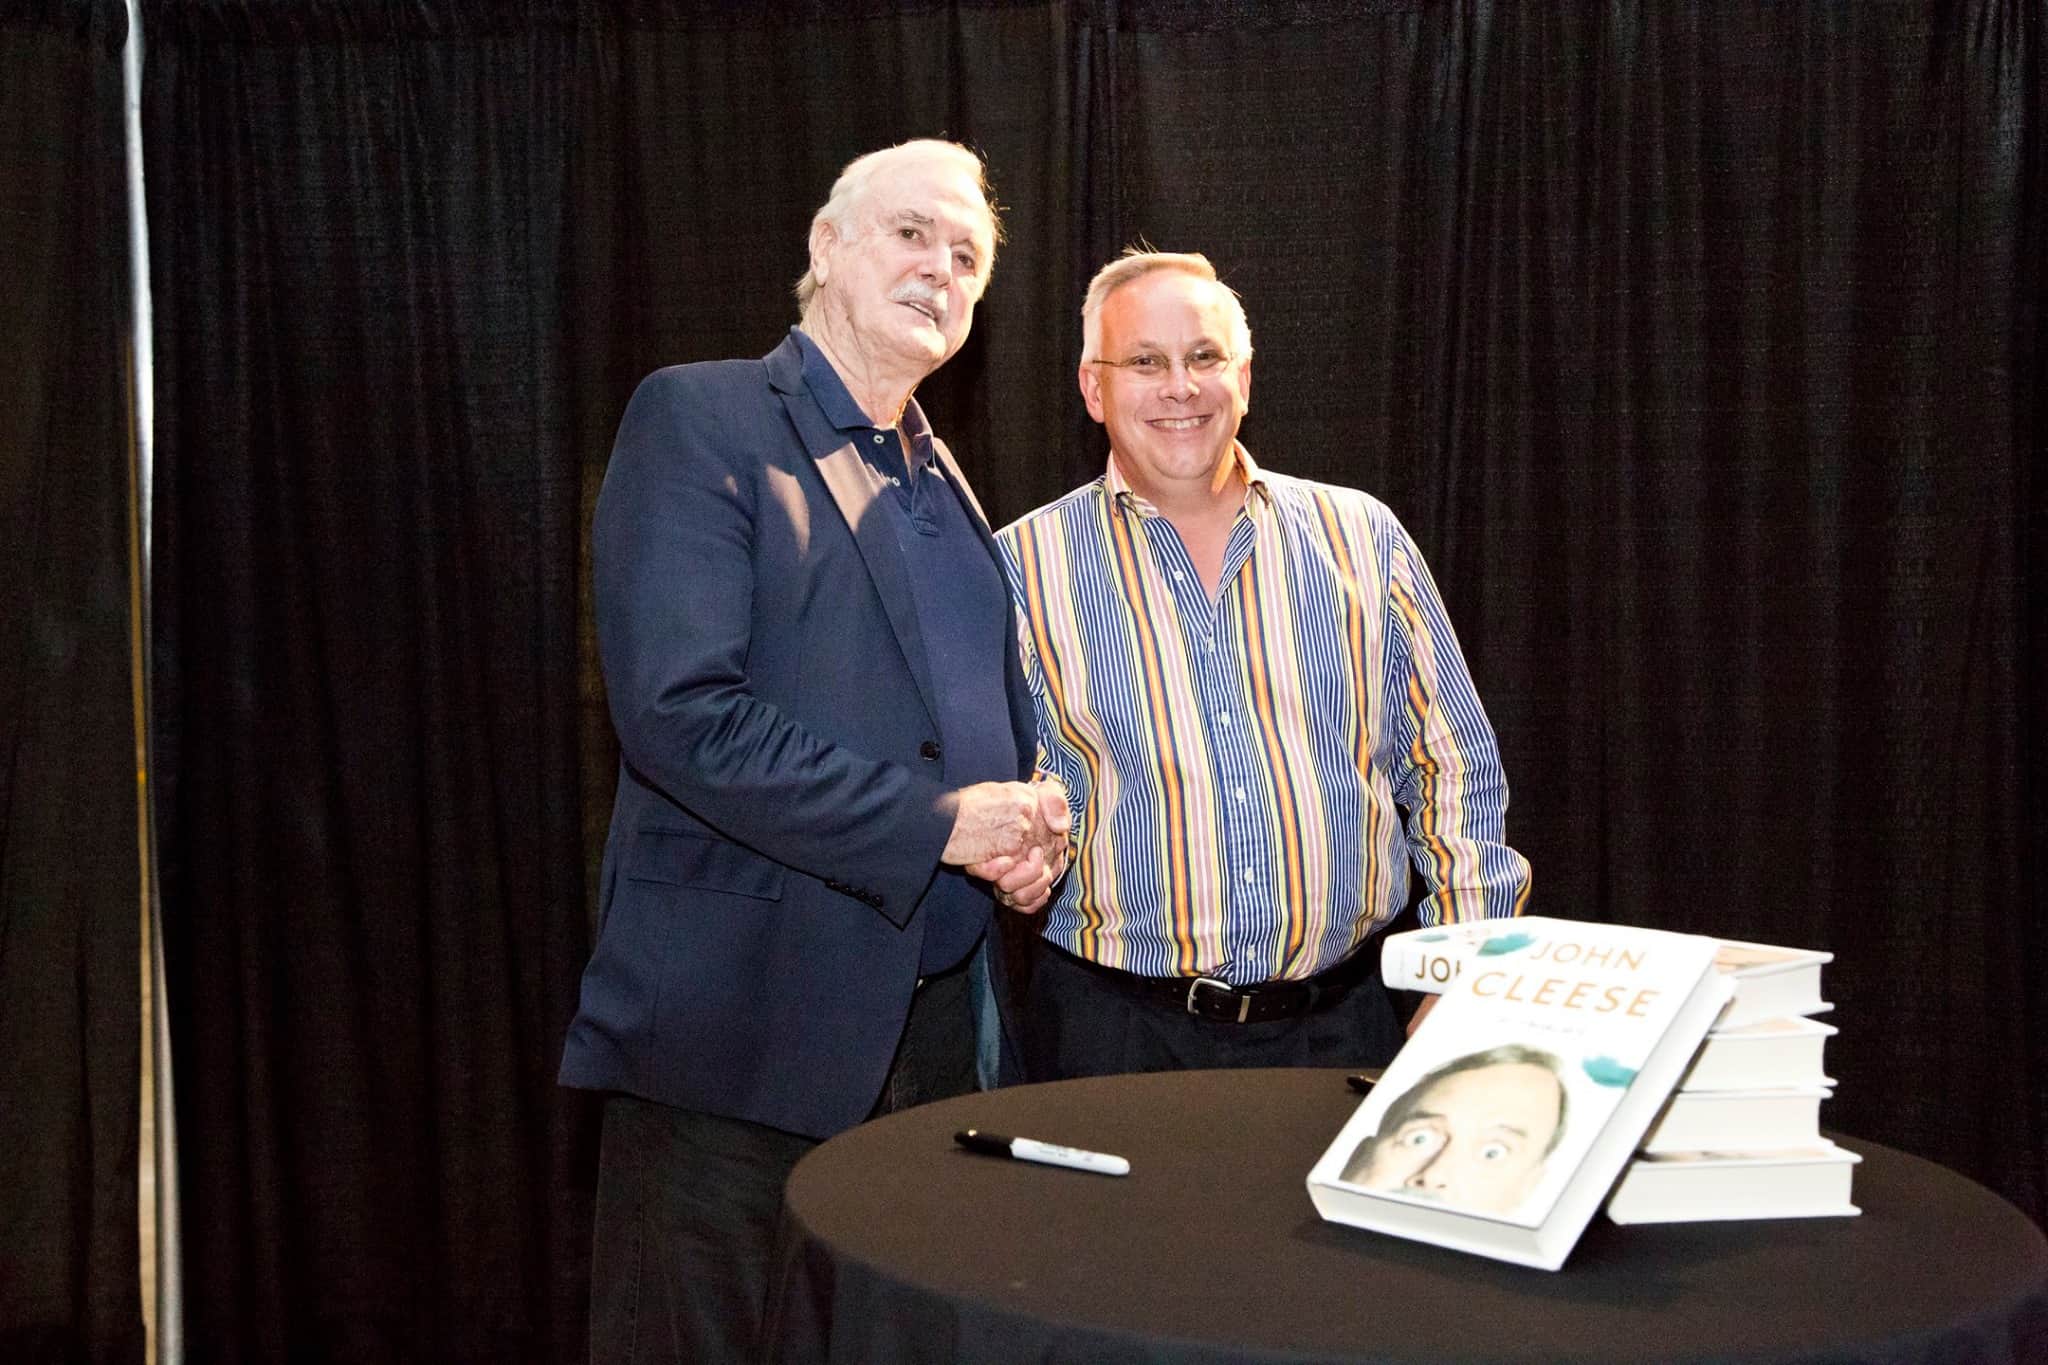 Chuck Frey with John Cleese